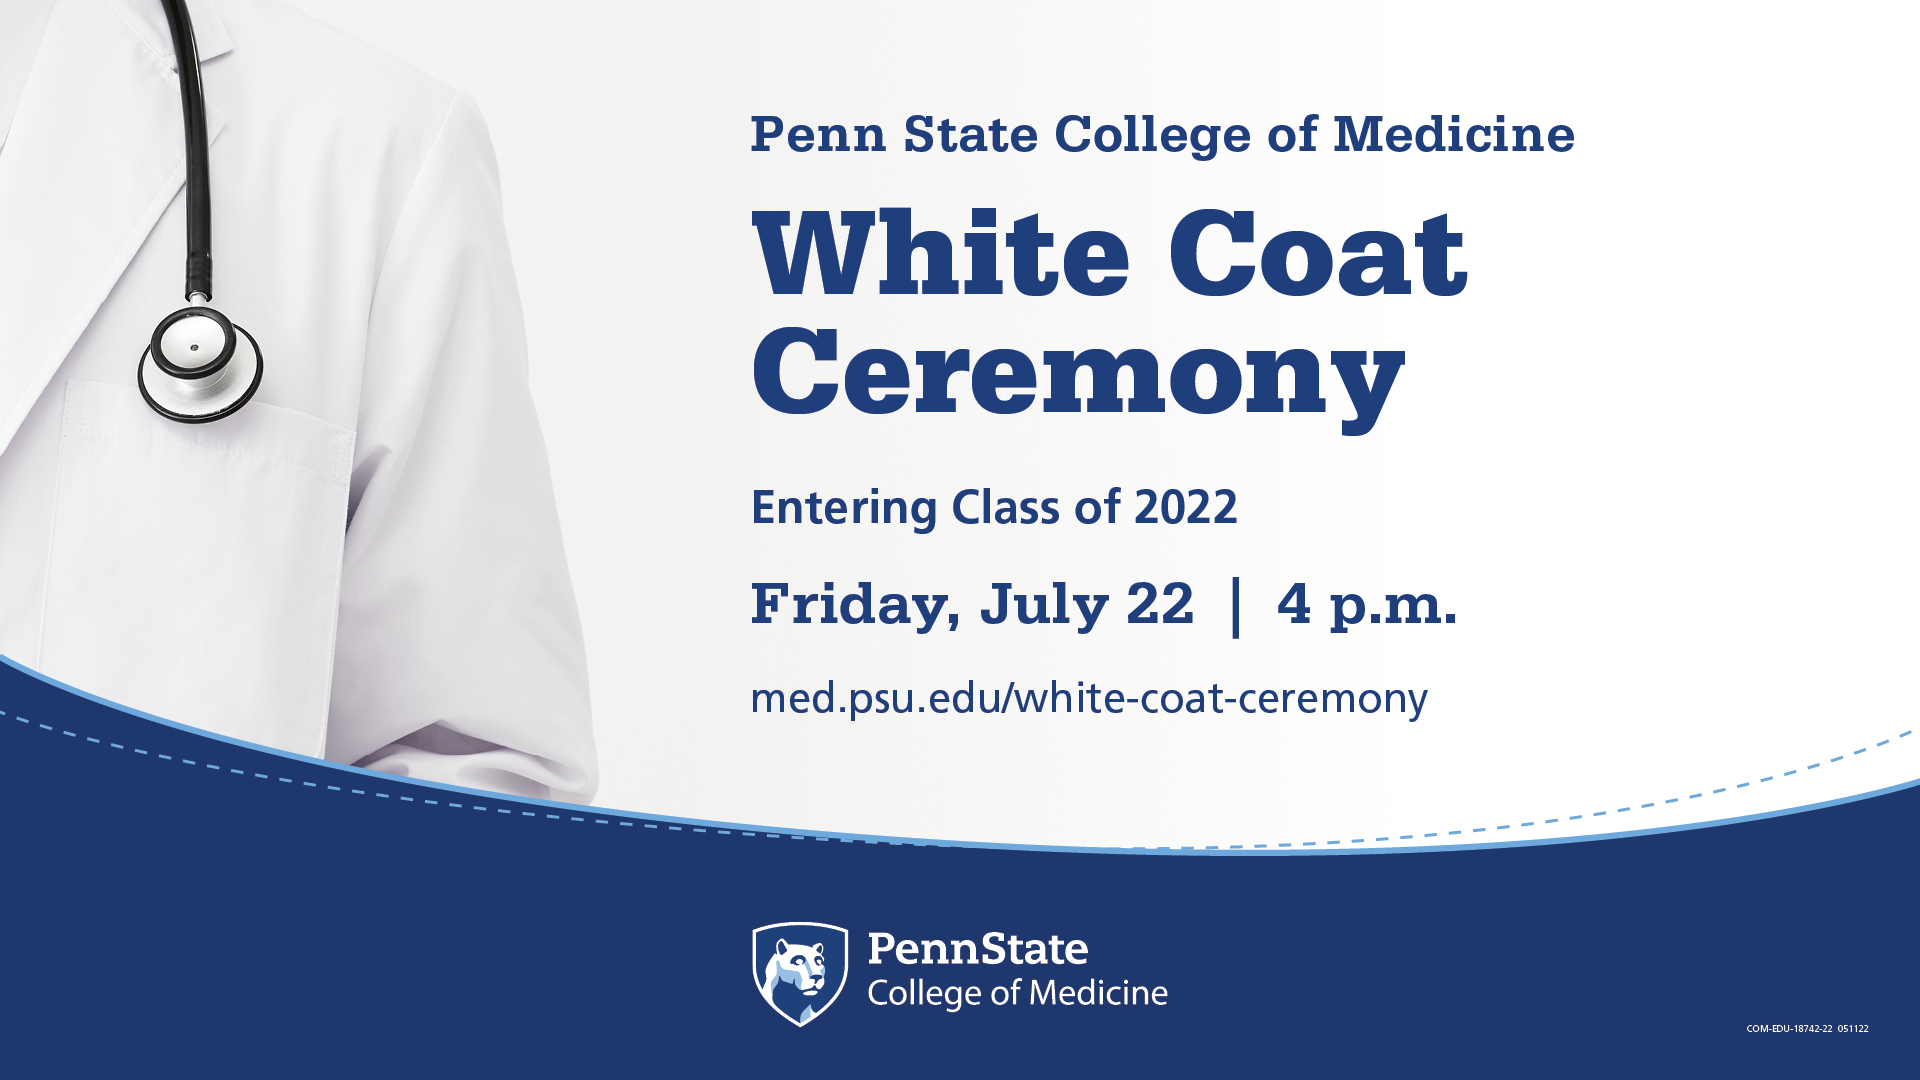 Image of a physician's white coat with White Coat Ceremony details for July 31: Entering class of 2021 at noon and Entering Class of 2020 at 4 p.m.